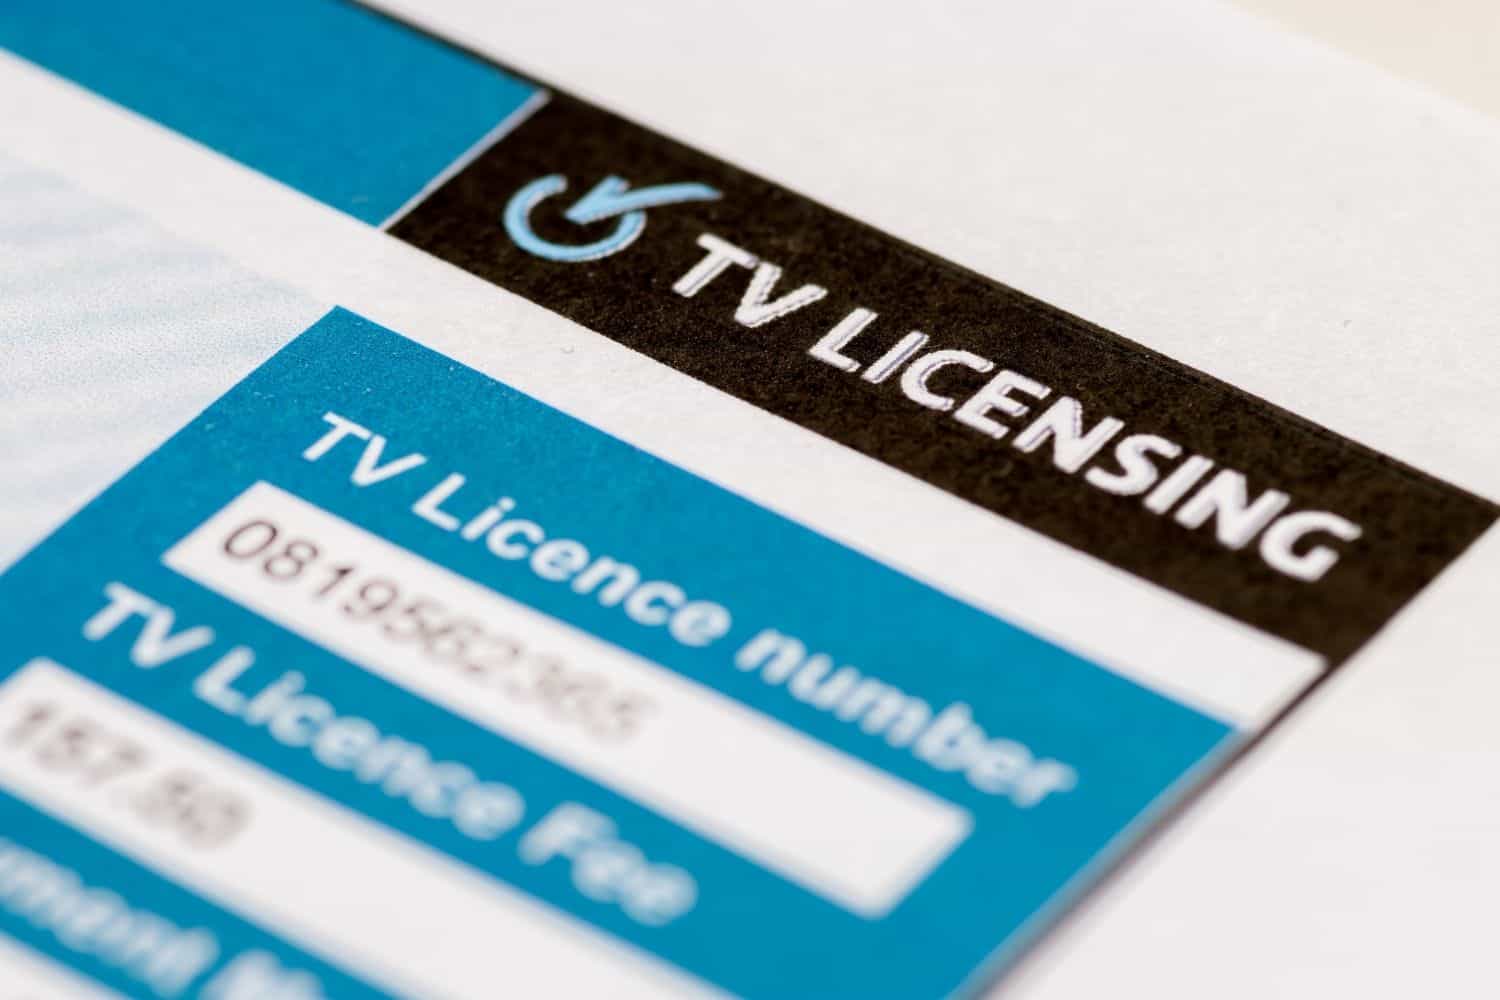 Be sure your TV licence is paid before Black Friday if you're hoping to score a TV deal